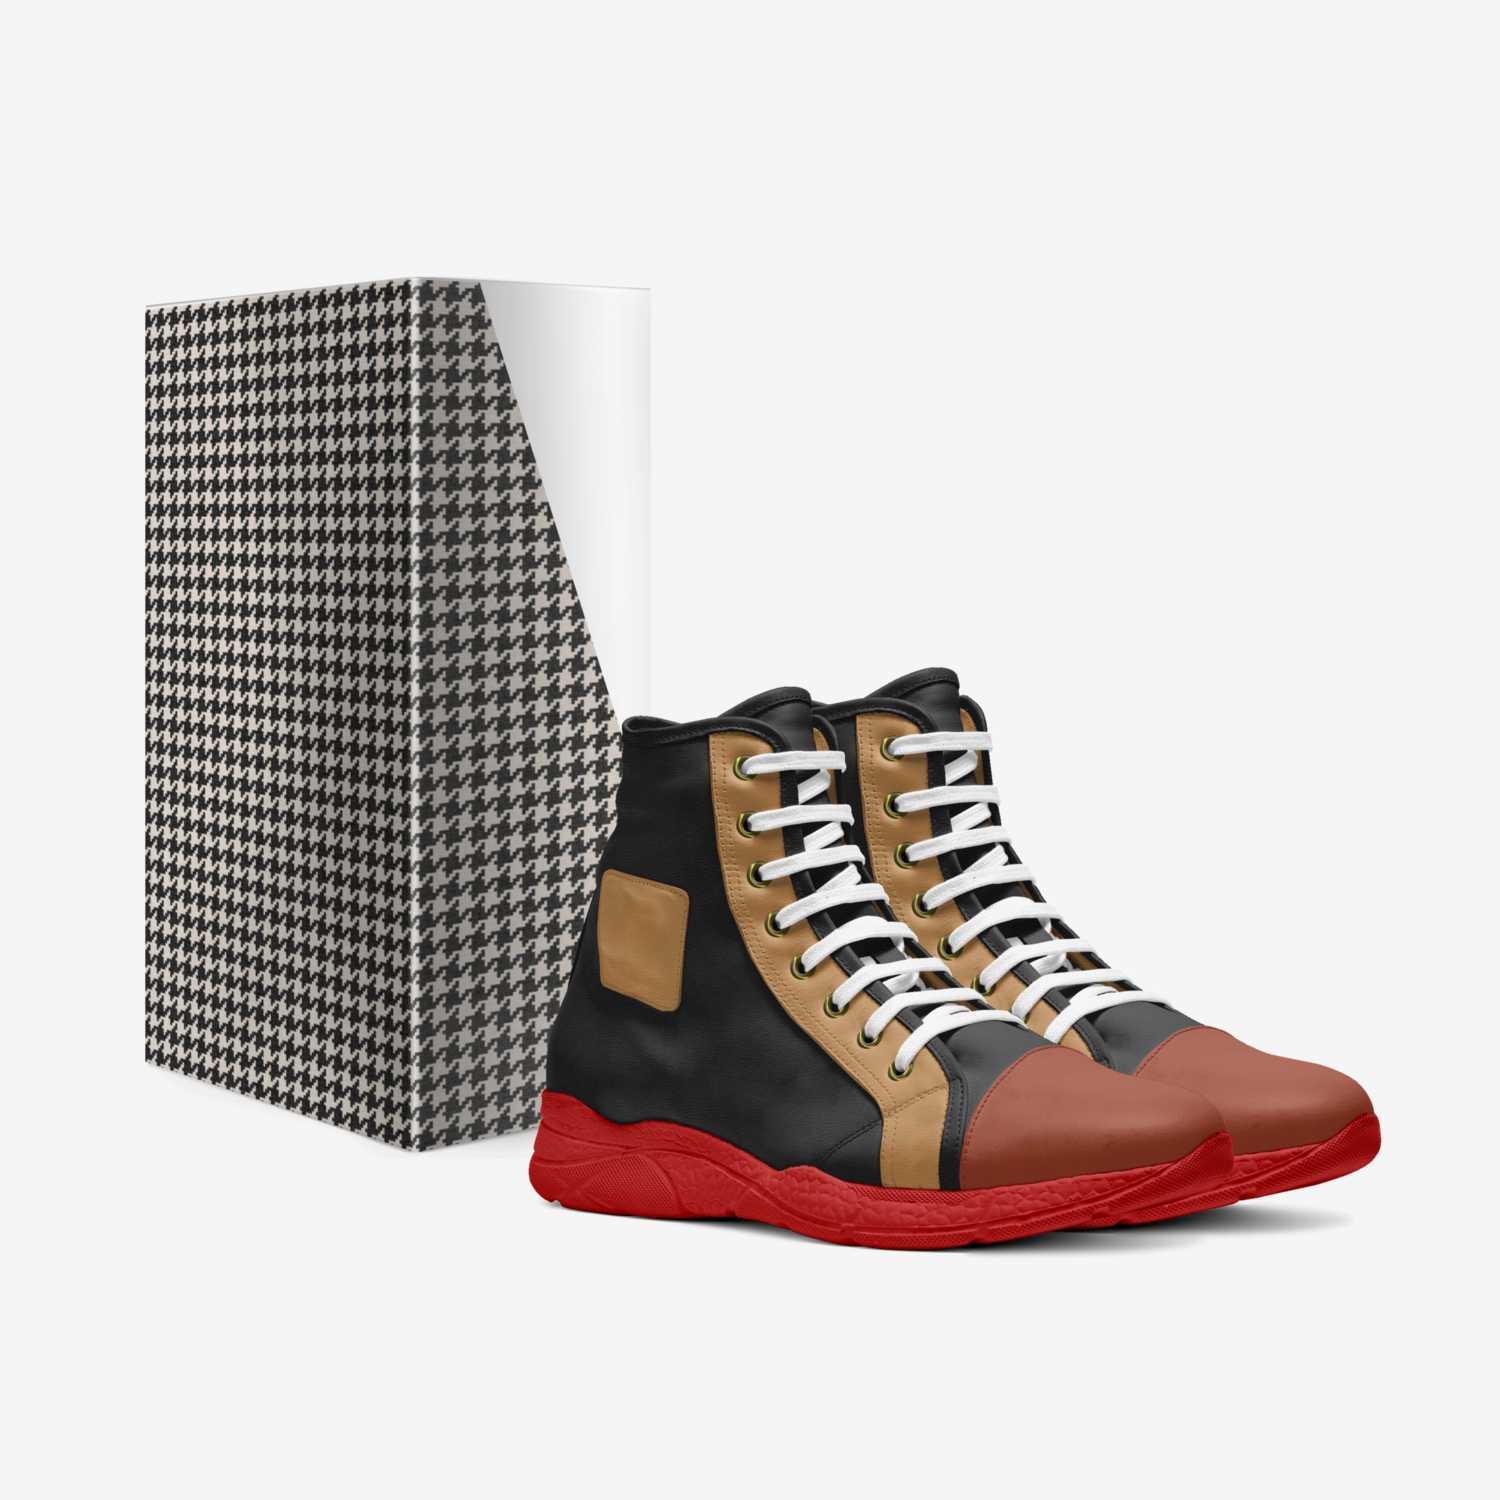 Dawit  custom made in Italy shoes by Andrew Washington | Box view